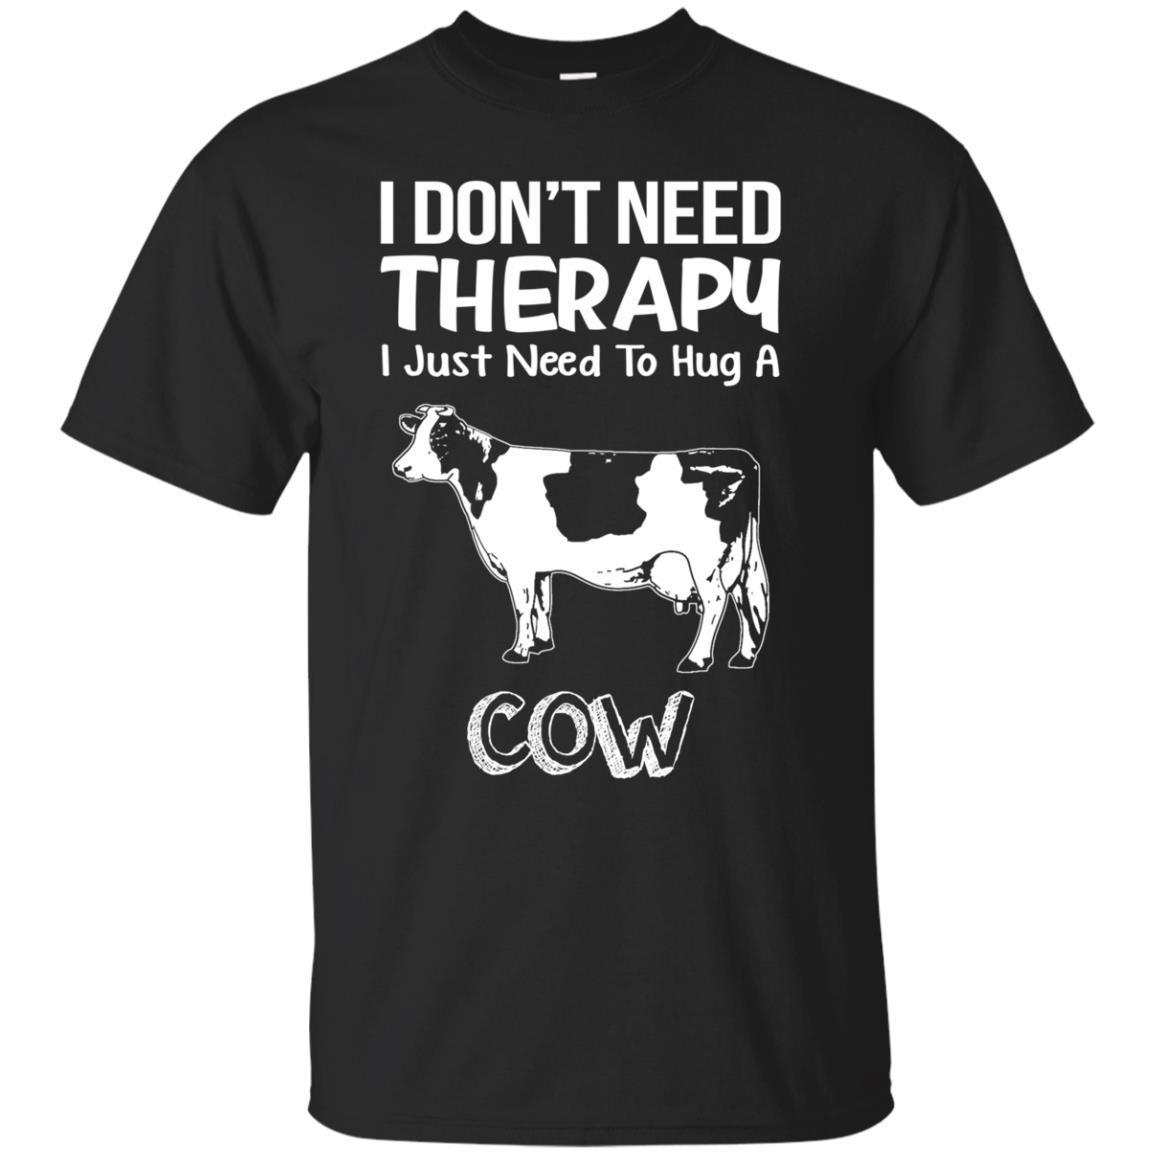 Check Out This Awesome I Dont Need Therapy I Just Need To Hug A Cow T Shirt